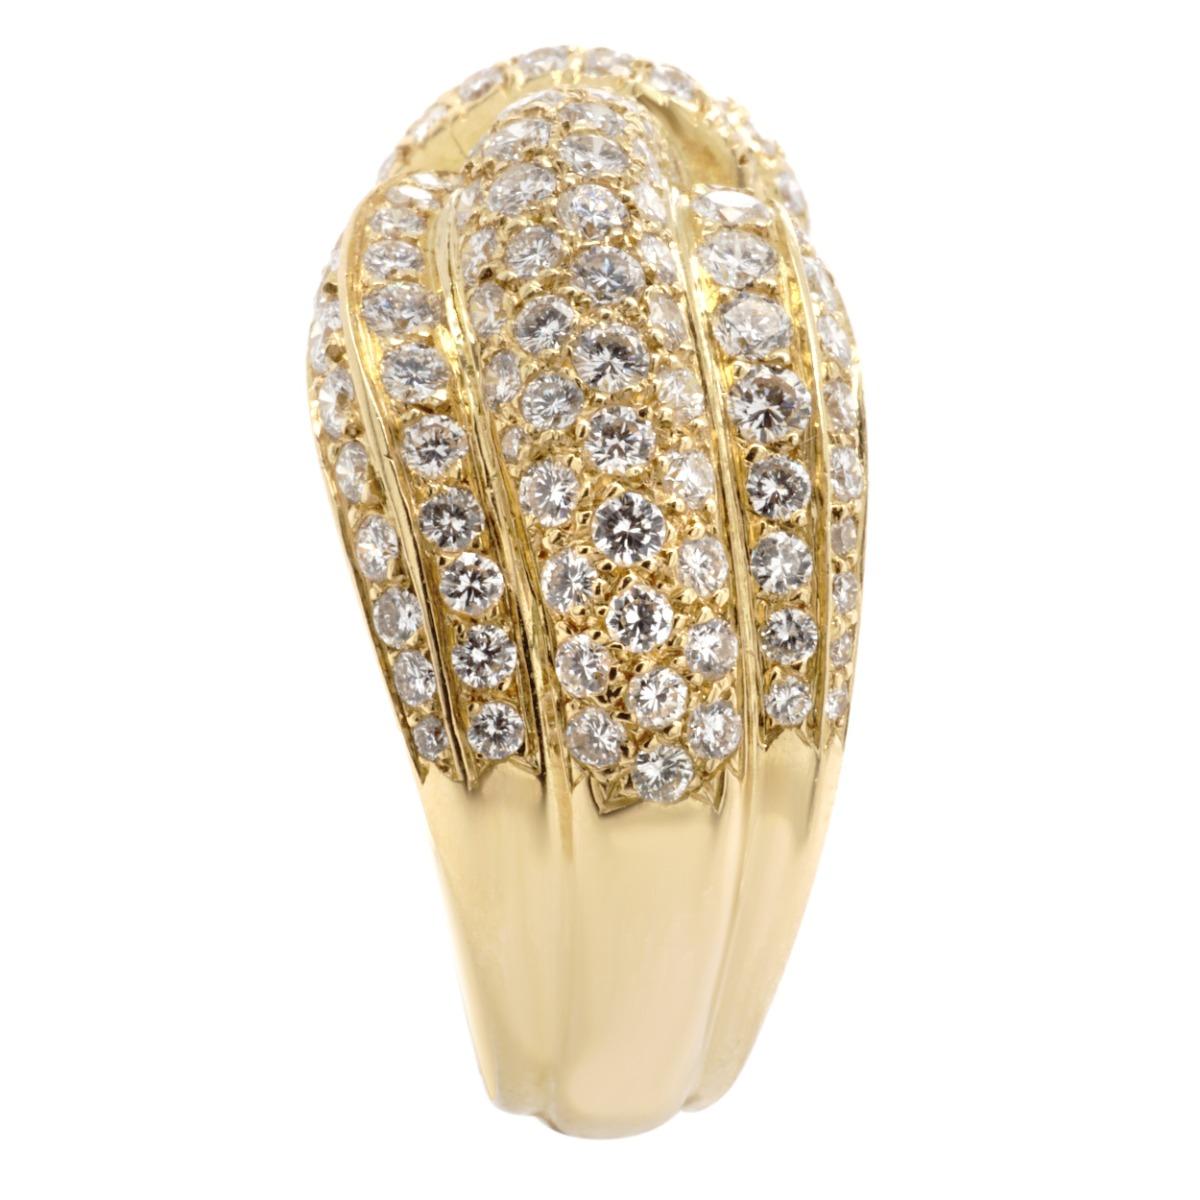 Modern Van Cleef & Arpels Diamond and Gold Ring For Sale